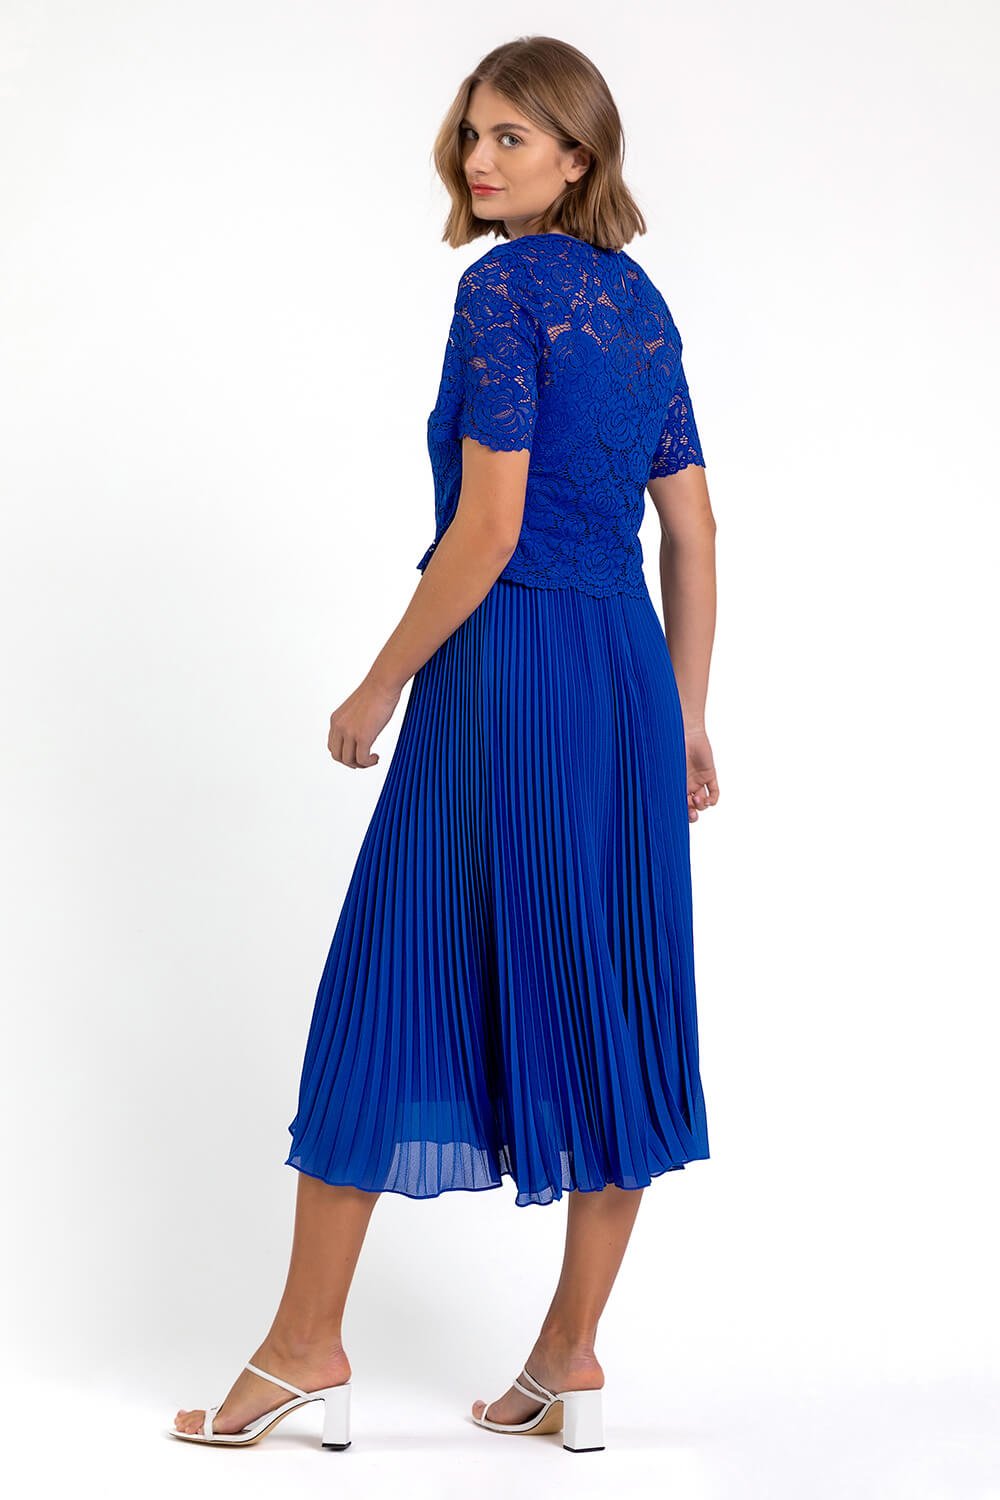 Royal Blue Lace Top Overlay Pleated Midi Dress, Image 2 of 4